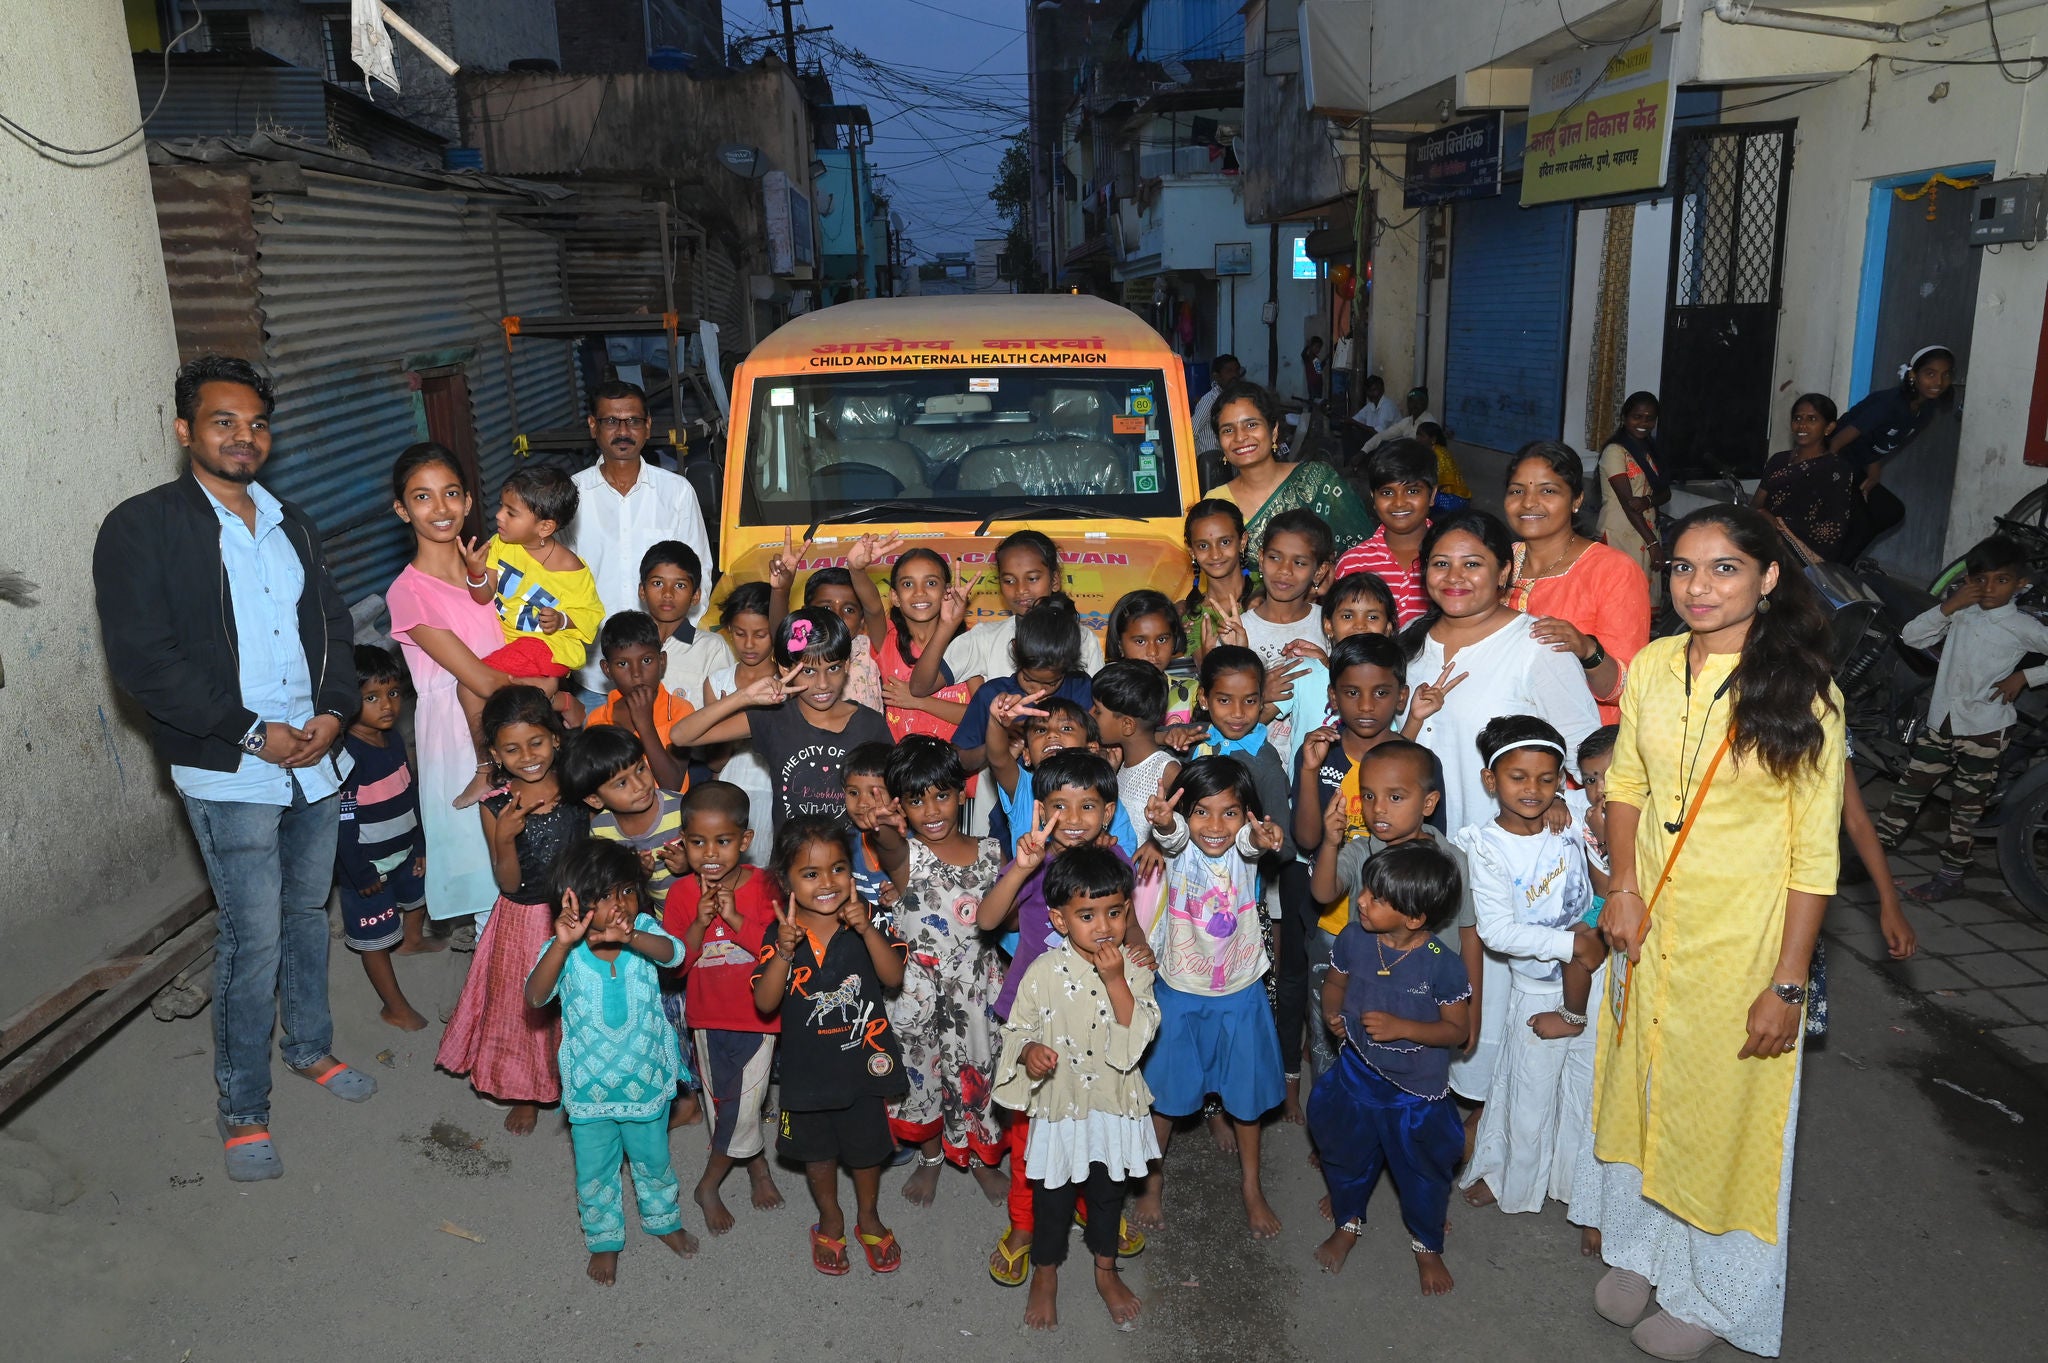 Sponsored van surrounded by children and adults